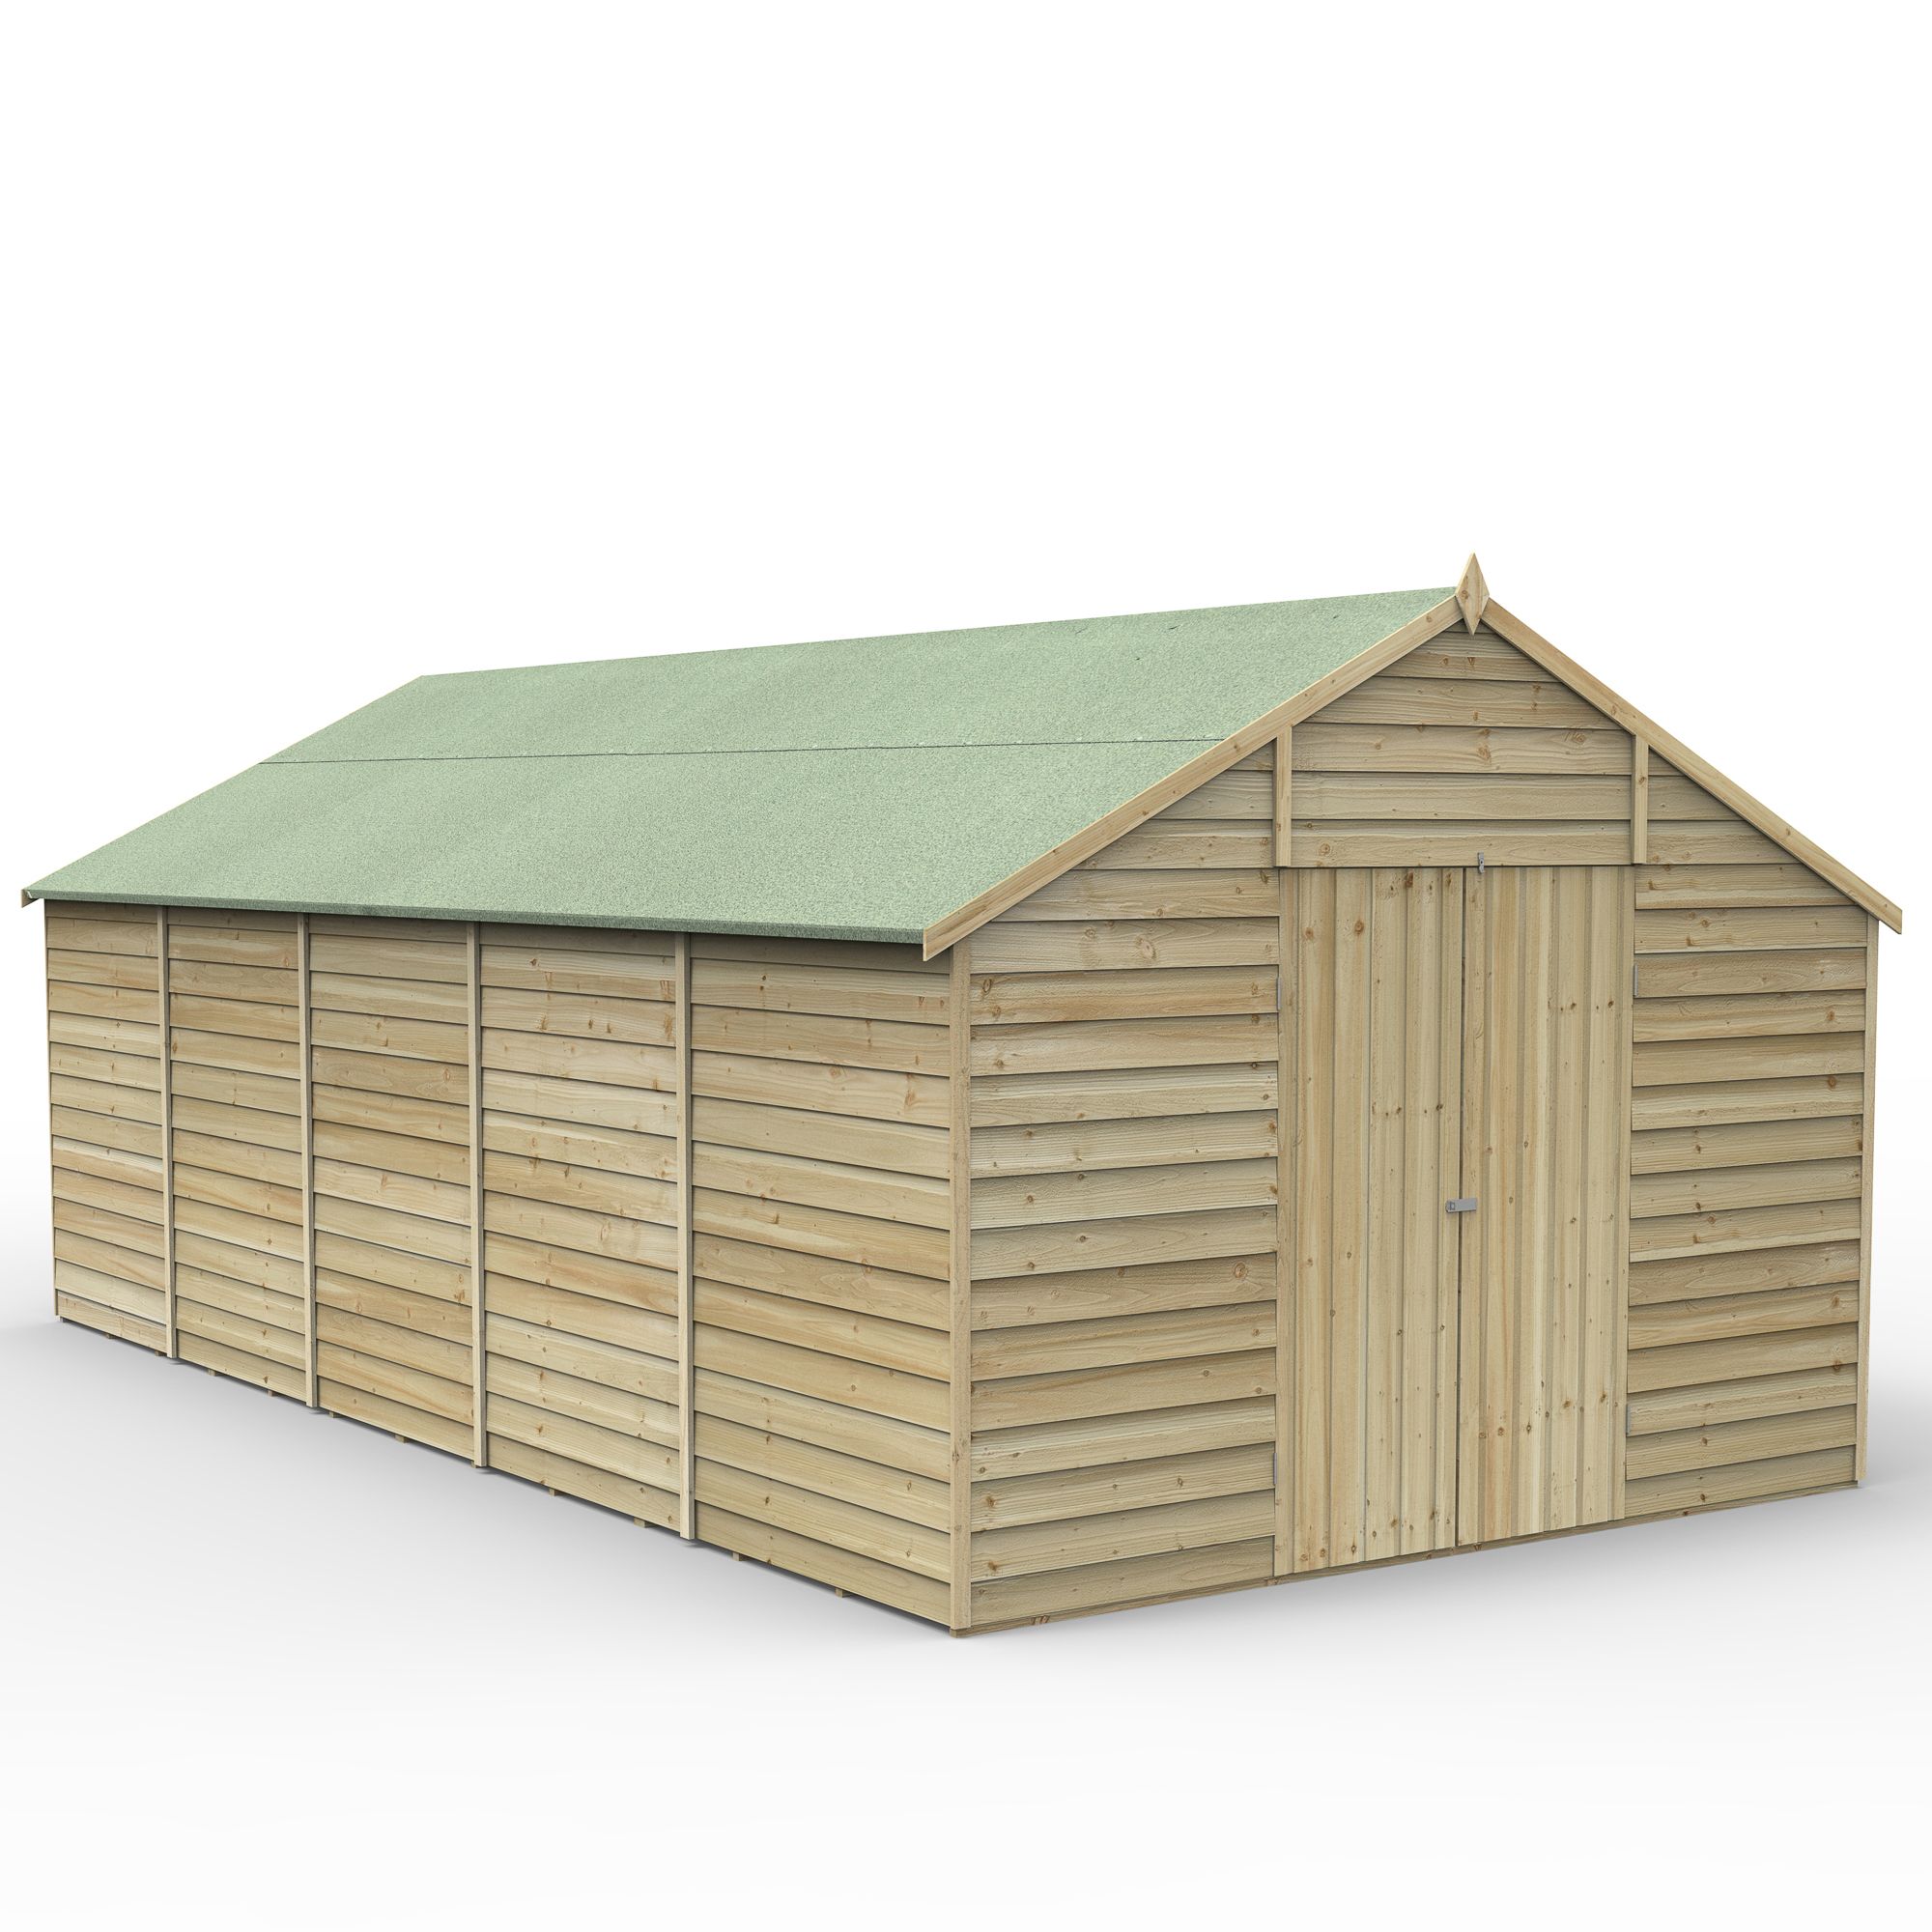 Forest Garden Overlap 20x10 ft Apex Wooden 2 door Shed with floor - Assembly service included